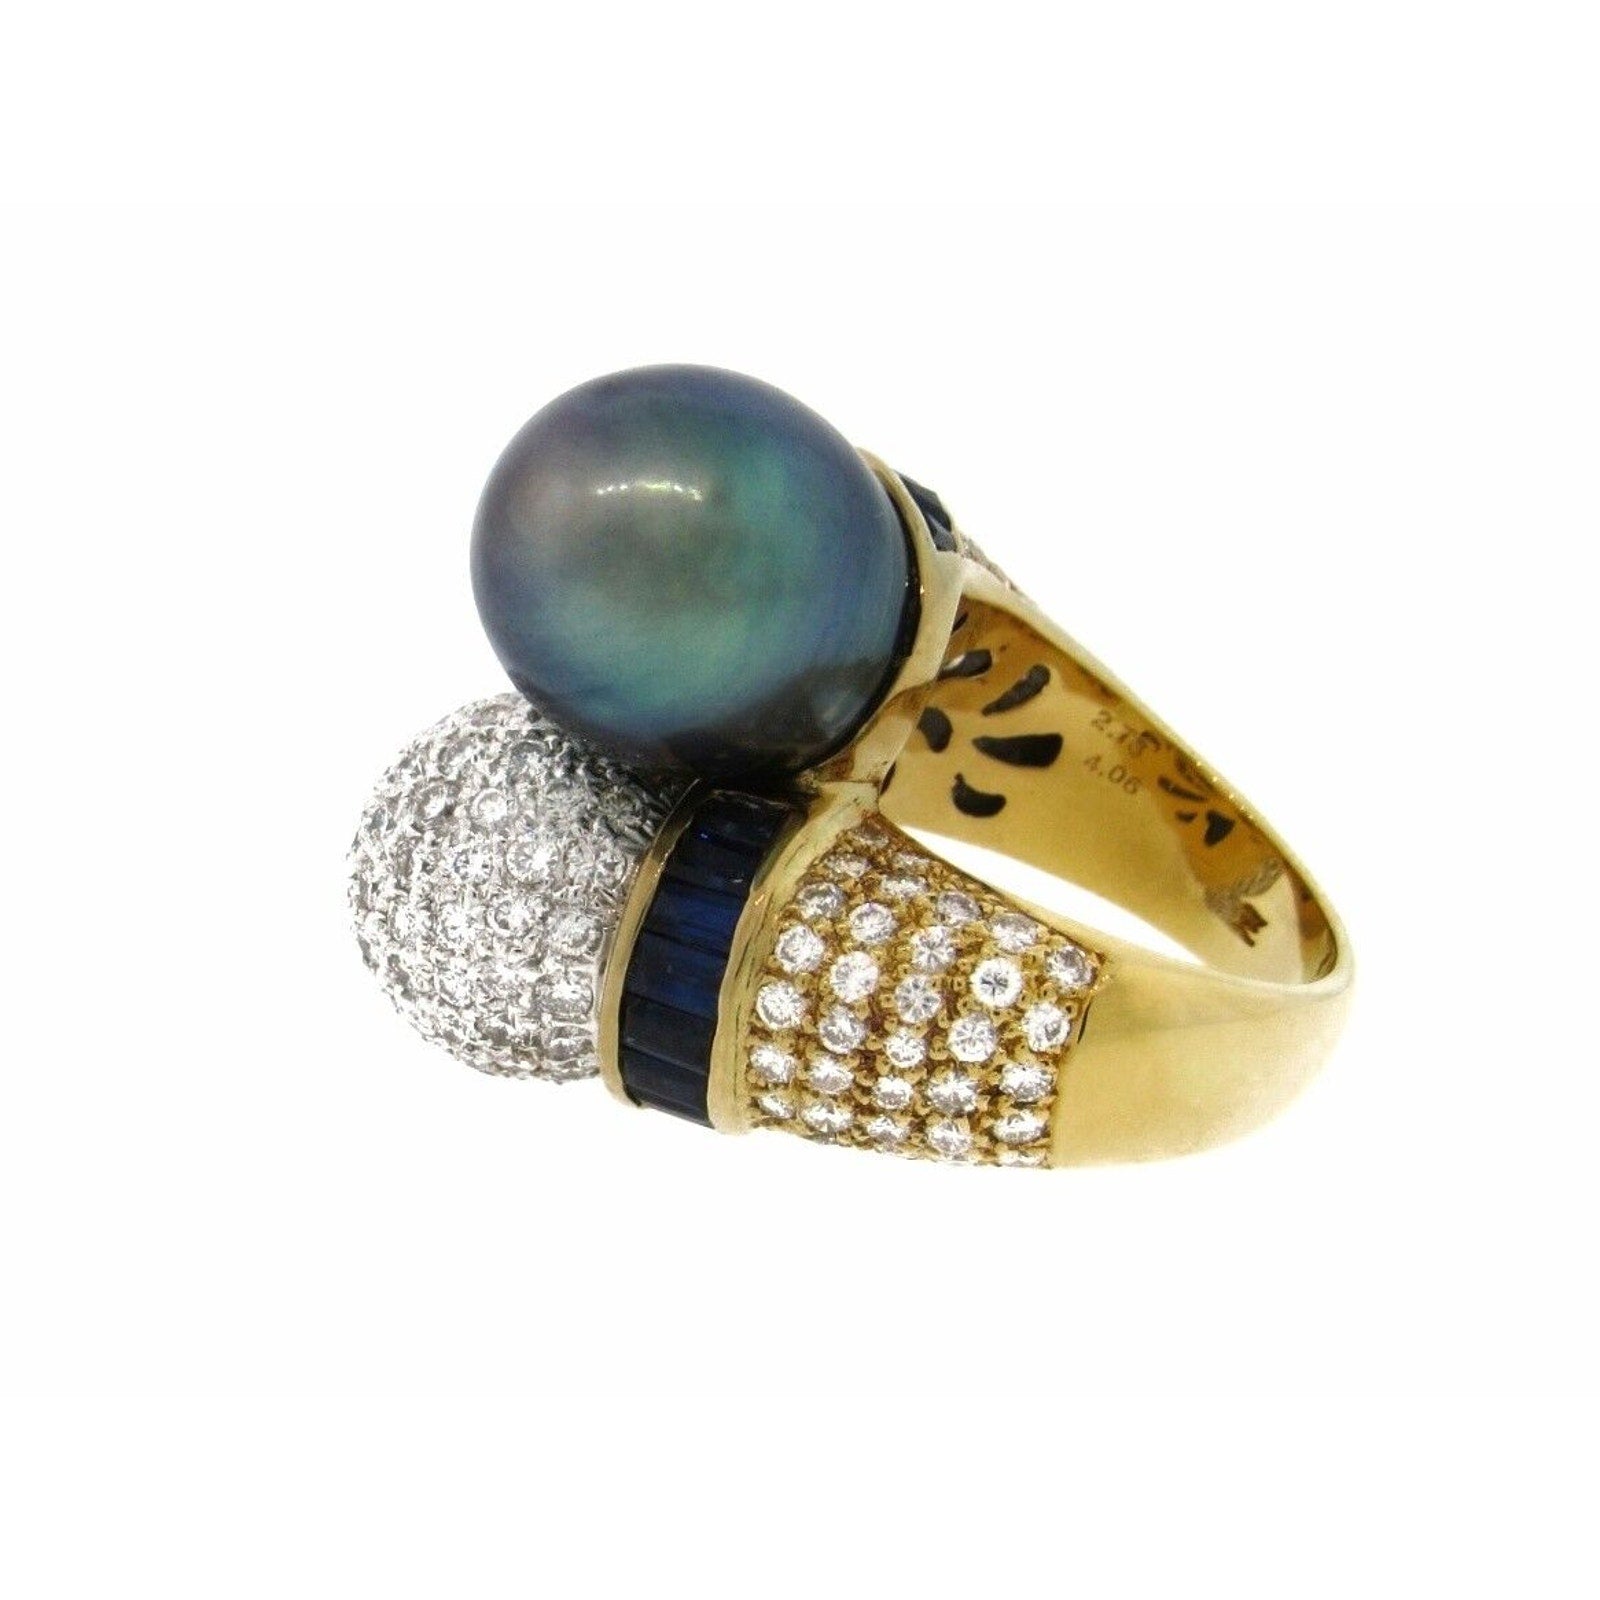 6.79 ct Black Pearl, Sapphire and Diamond Crossover Ring18k Yellow Gold